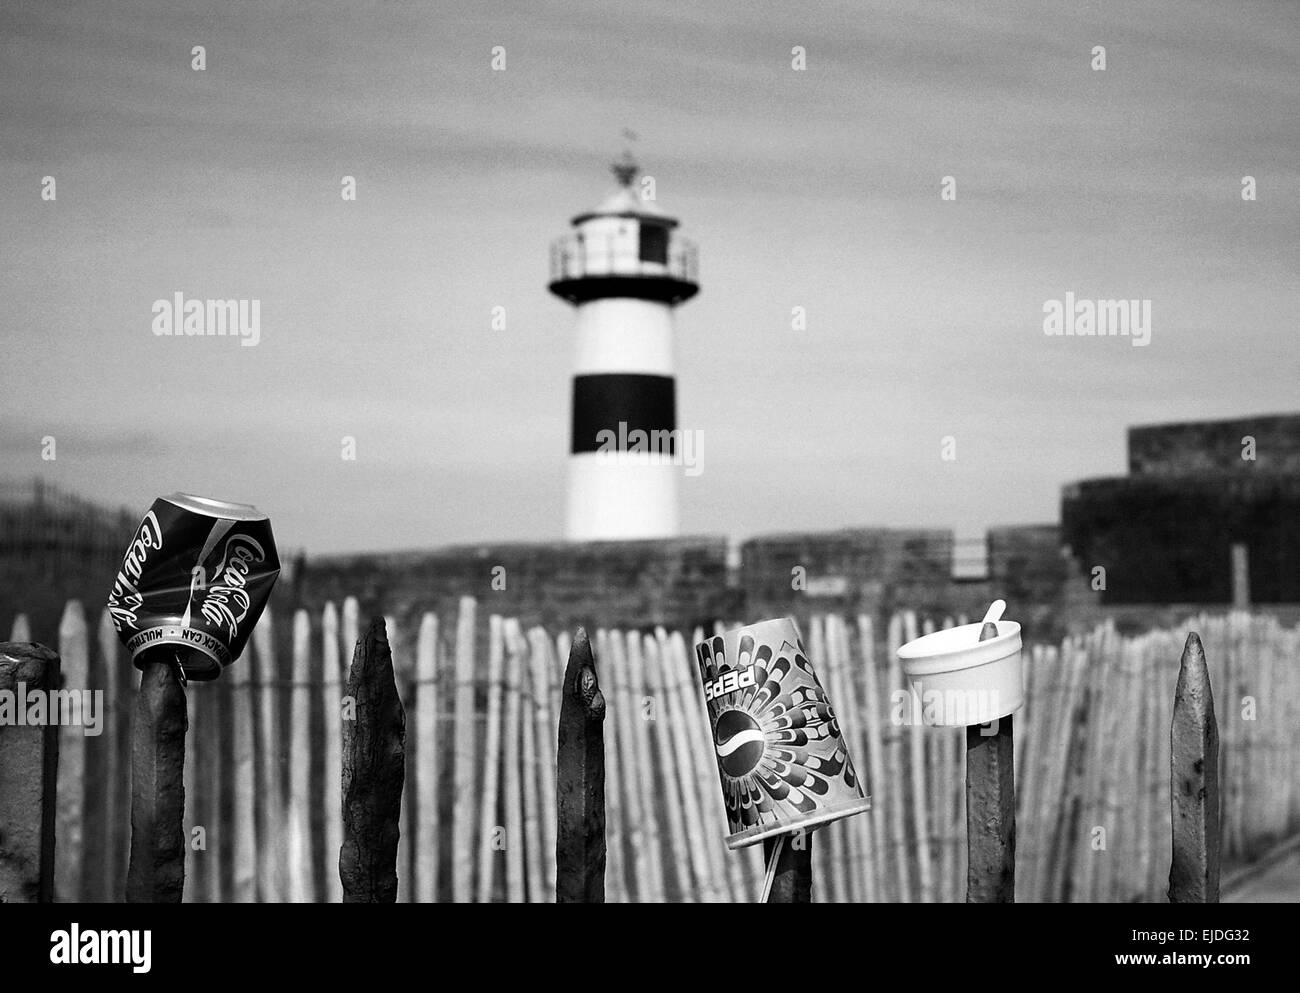 AJAXNETPHOTO. 2010. SOUTHSEA, ENGLAND. - RUBBISH FENCE AND LIGHTHOUSE. A CONVENIENT PLACE FOR PASSERS BY TO LEAVE THEIR EMPTY DRINK CANS AND PLASTIC. PHOTO:JONATHAN EASTLAND/AJAX REF:CD0114 15 11A Stock Photo